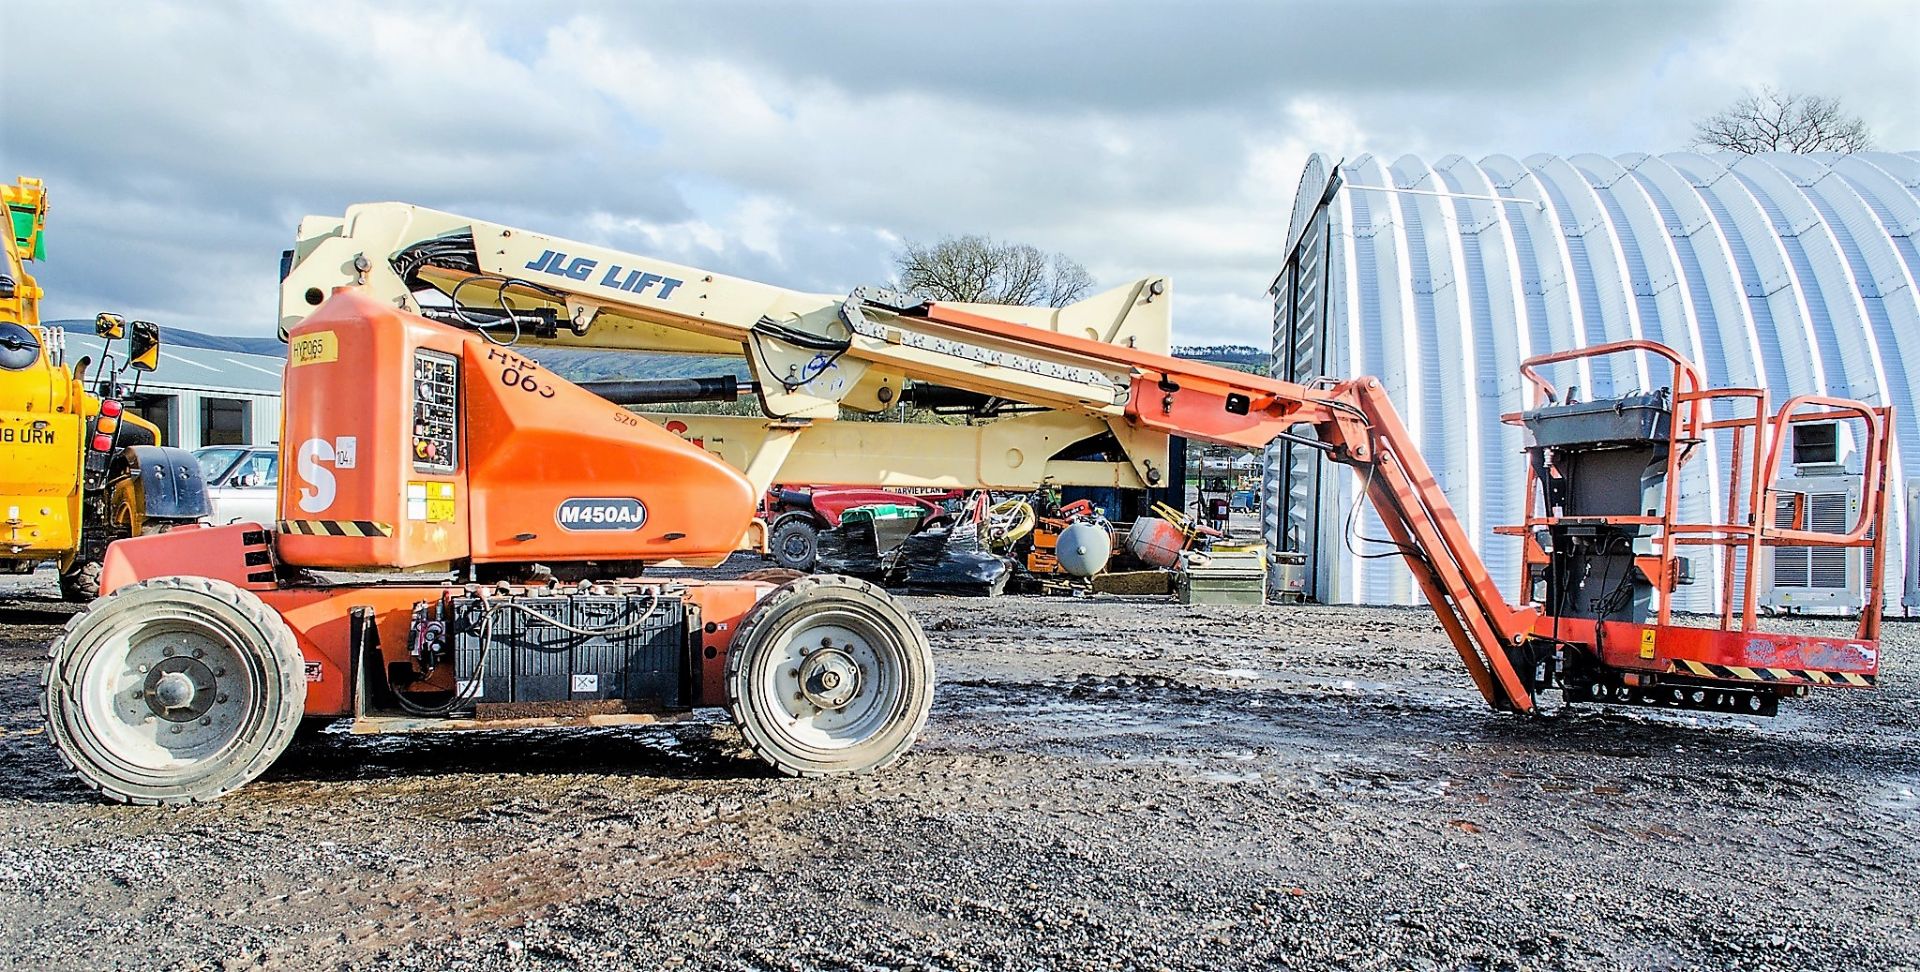 JLG M450AJ battery electric articulated boom access platform Year : 2006 S/N: 2718 c/w generator - Image 8 of 19